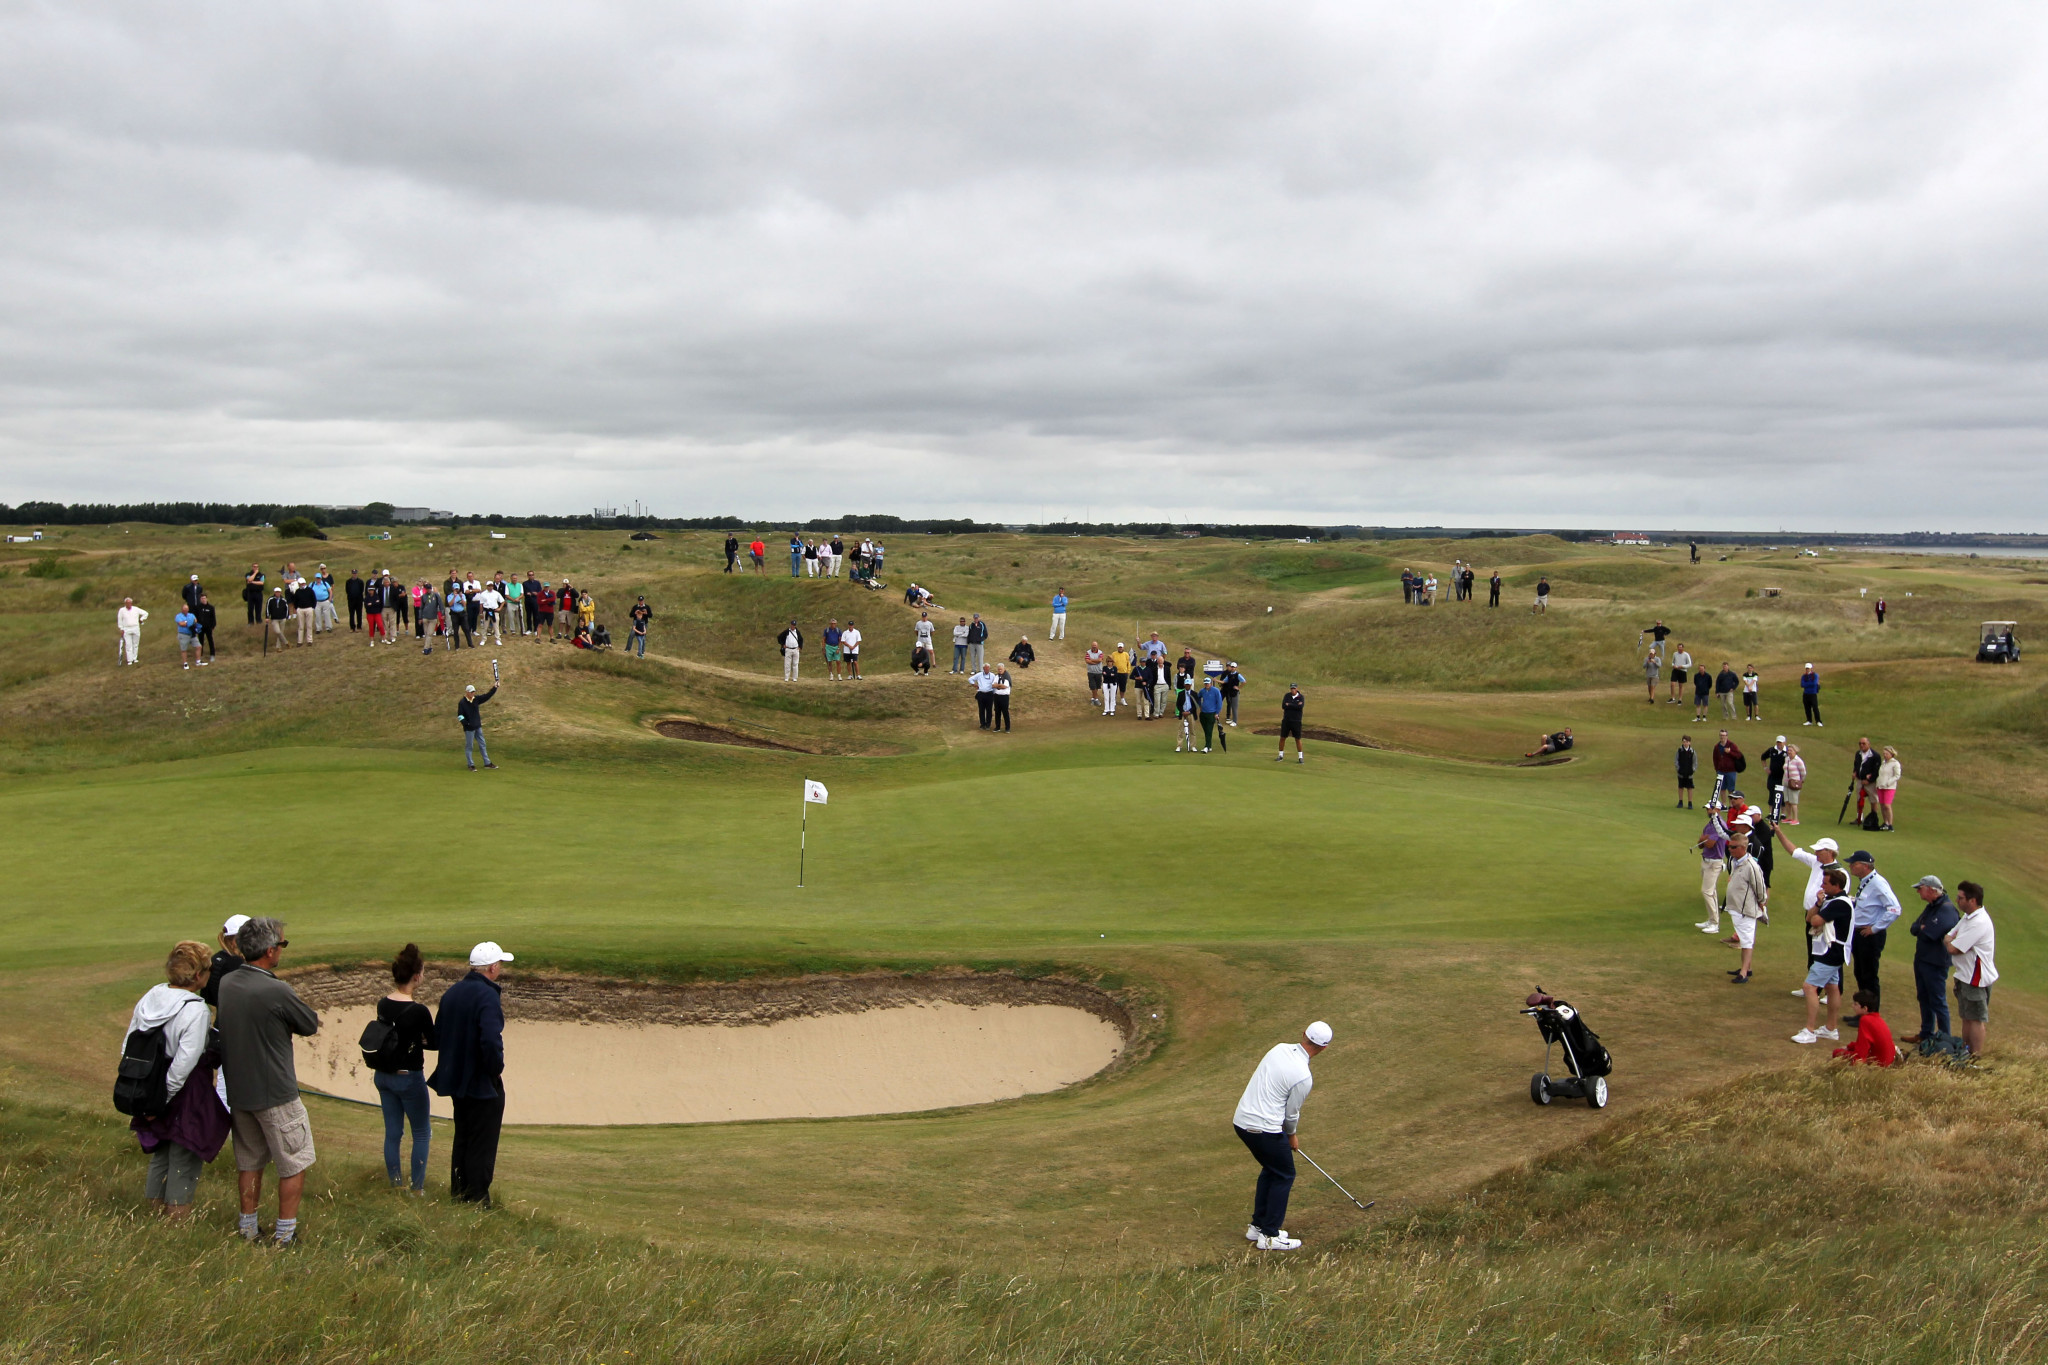 Stricter COVID-19 protocols to be implemented at The Open Championship